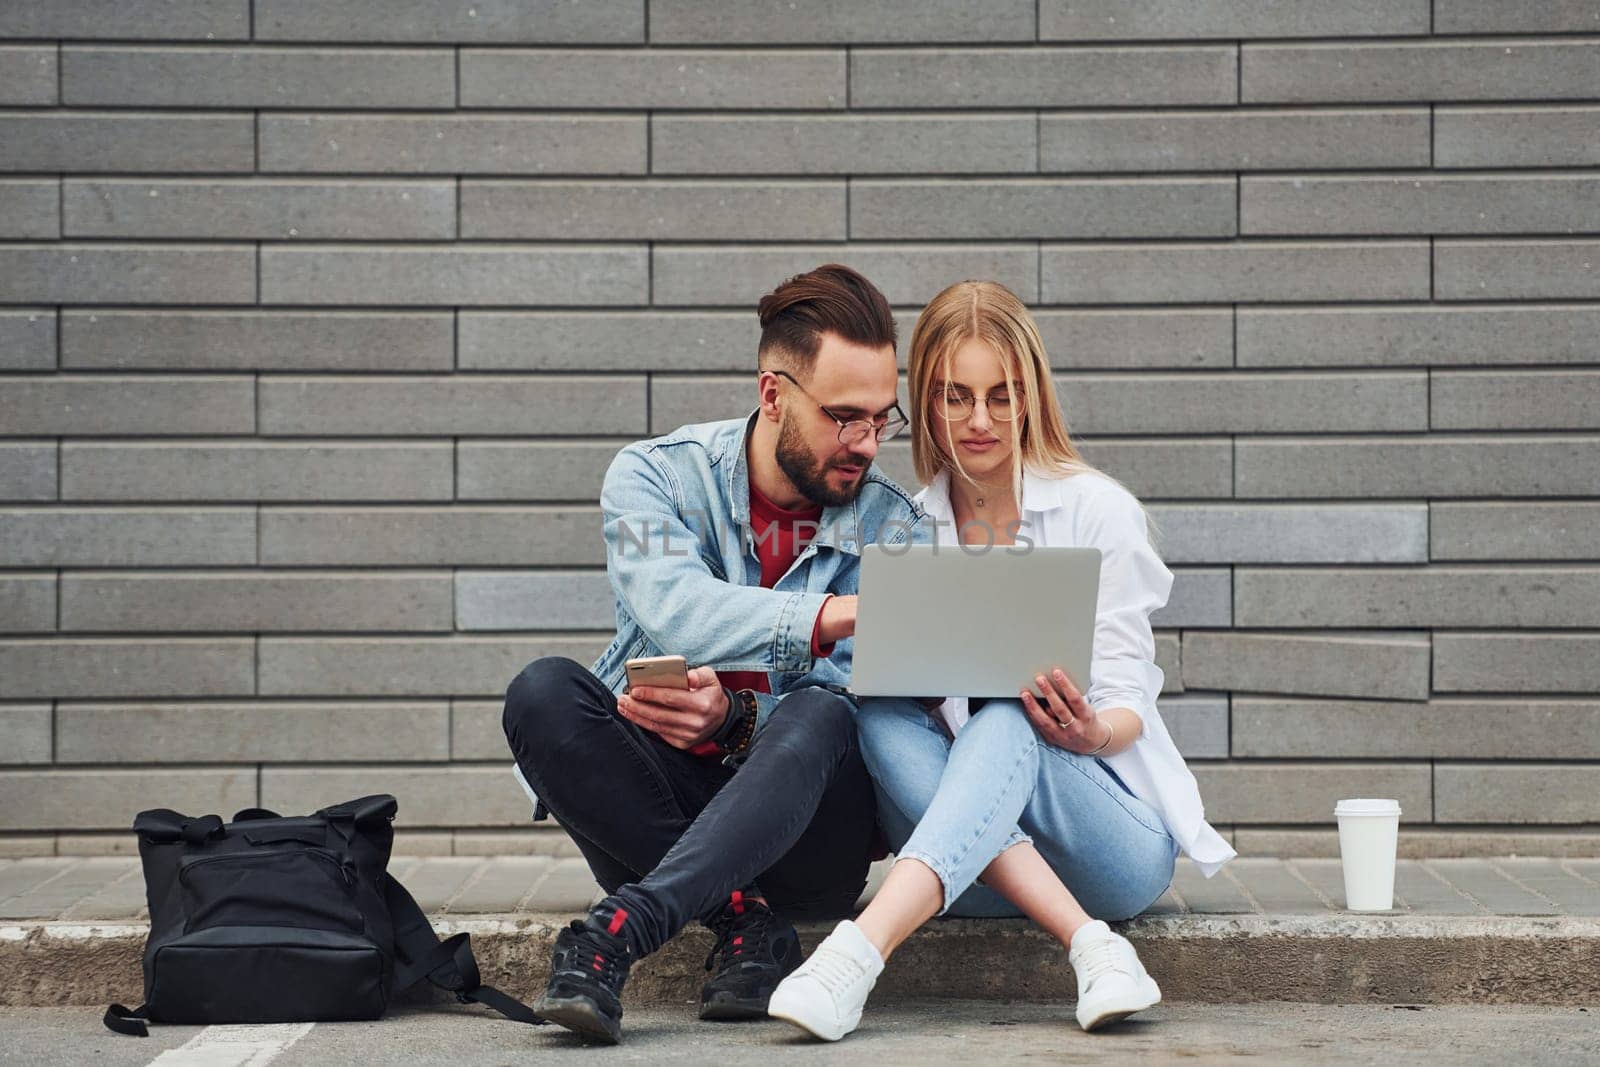 Using laptop. Young stylish man with woman in casual clothes sitting outdoors together. Conception of friendship or relationships.